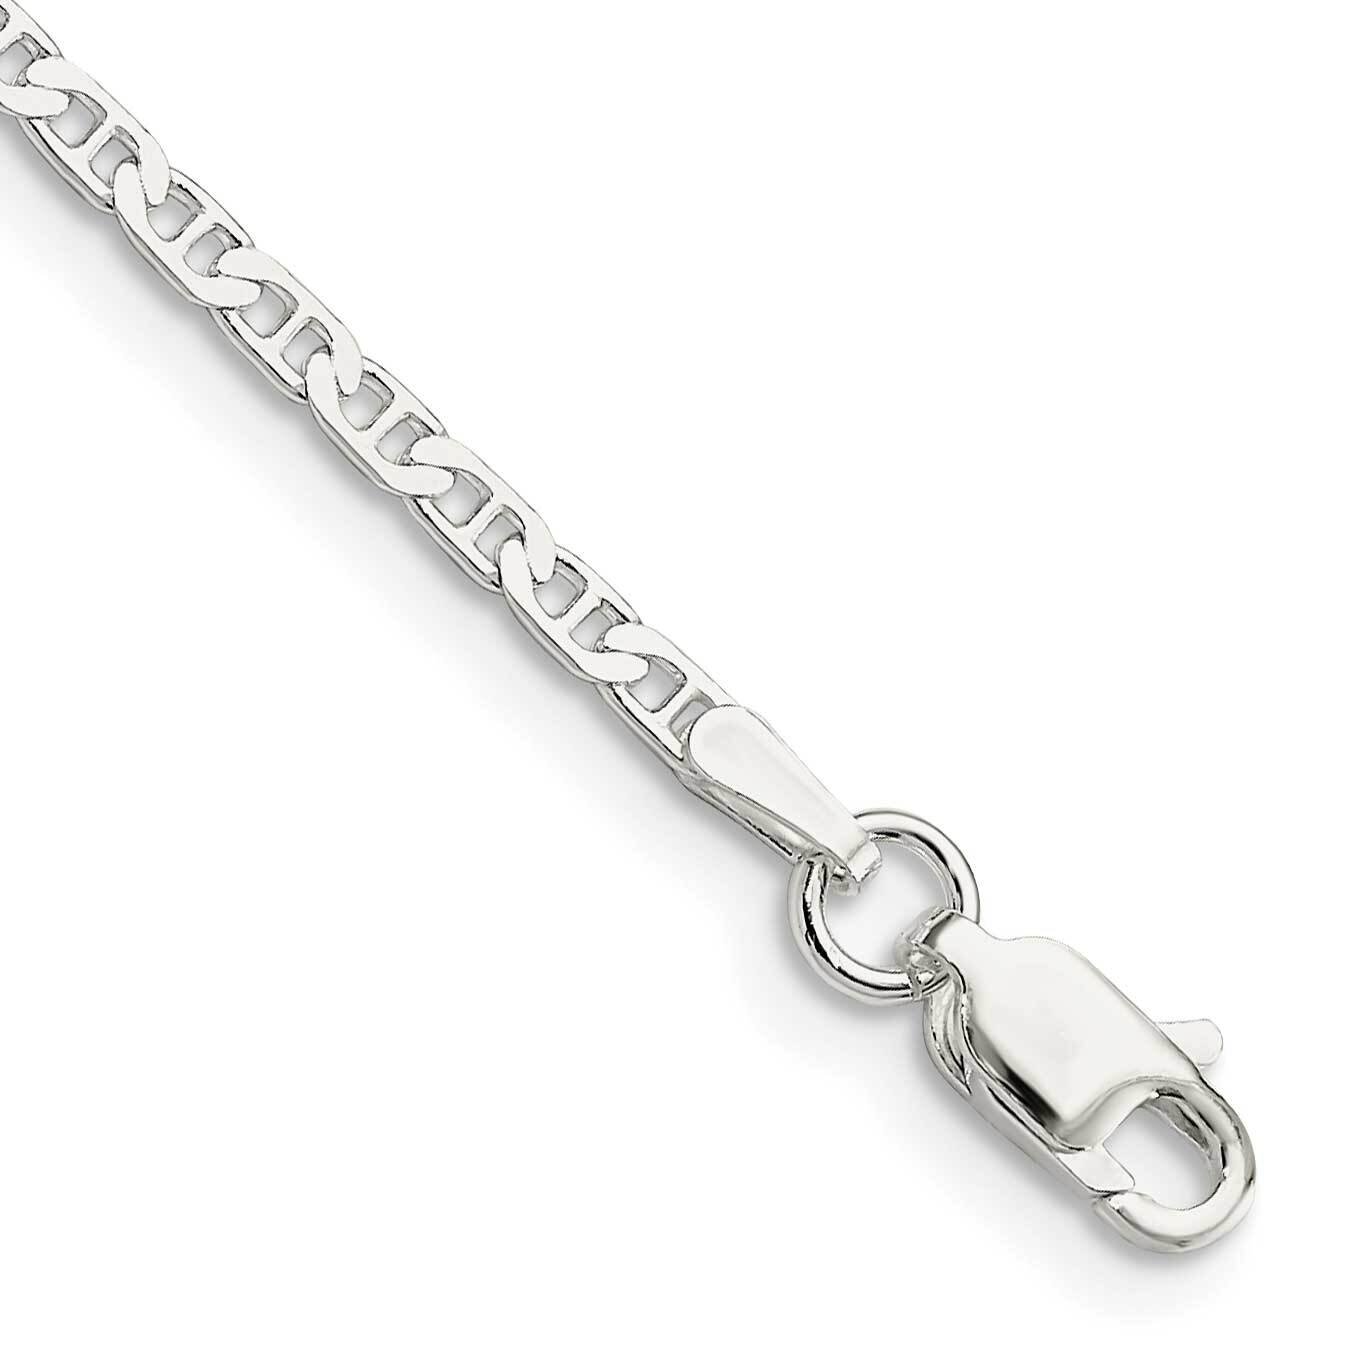 2.1mm Flat Anchor Chain Anklet 10 Inch Sterling Silver QAN060-10